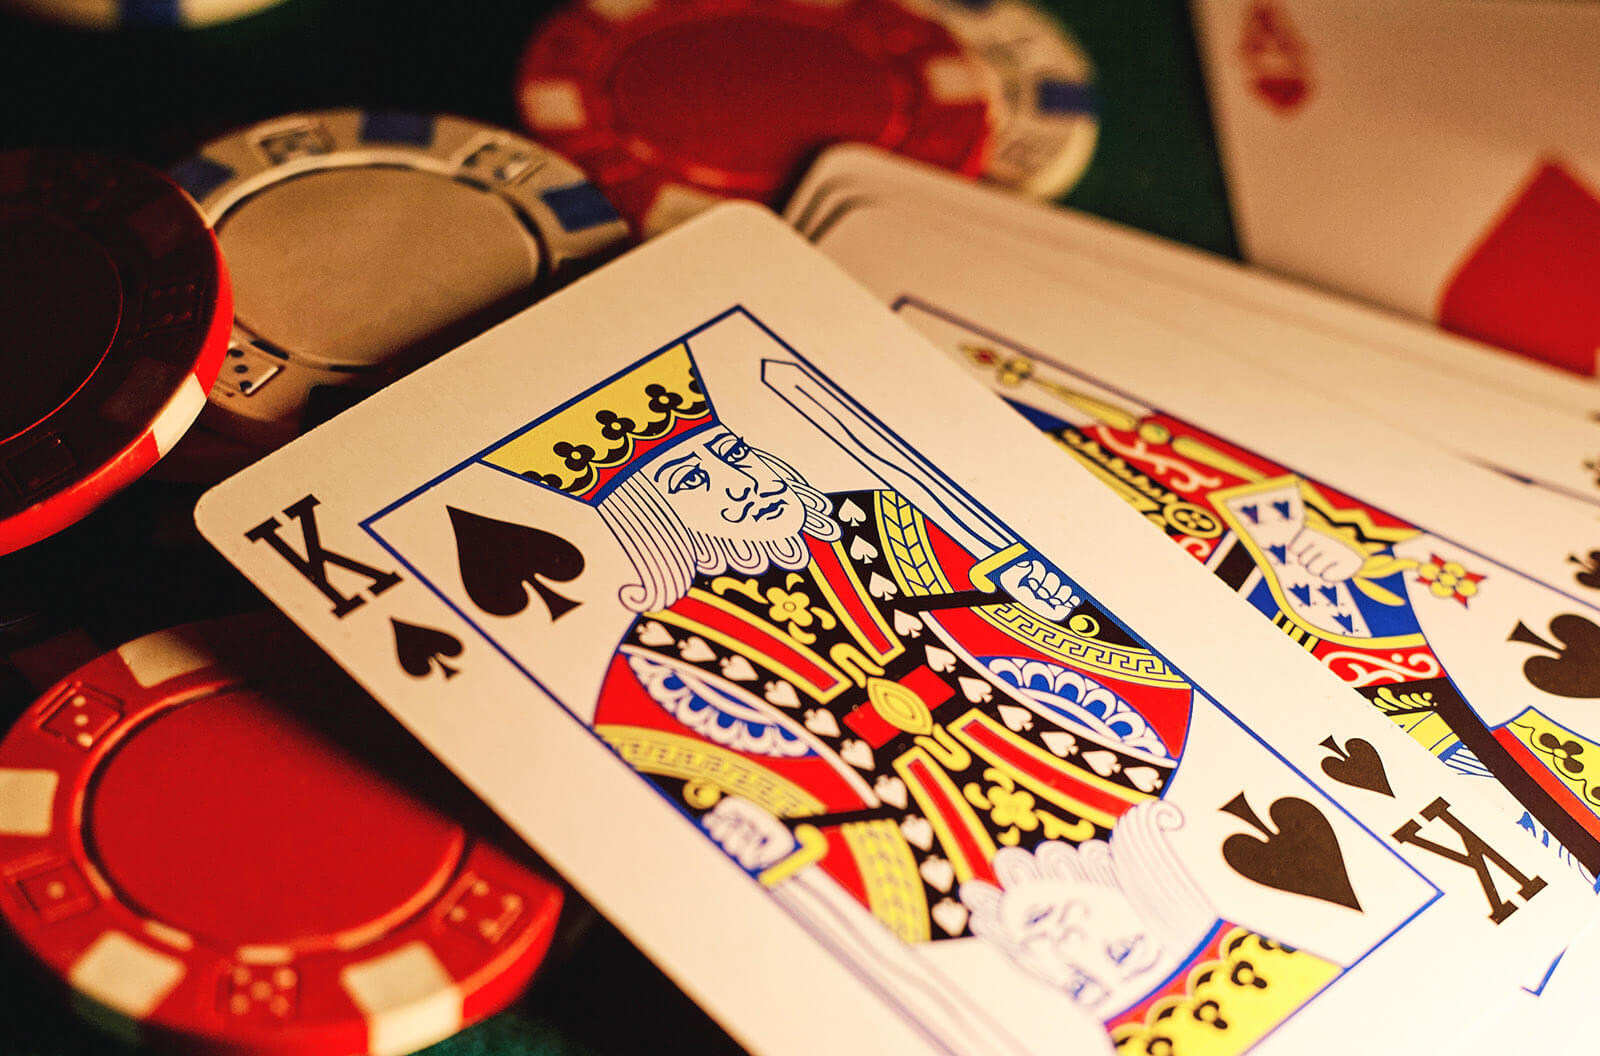 play slots Is Crucial To Your Business. Learn Why!